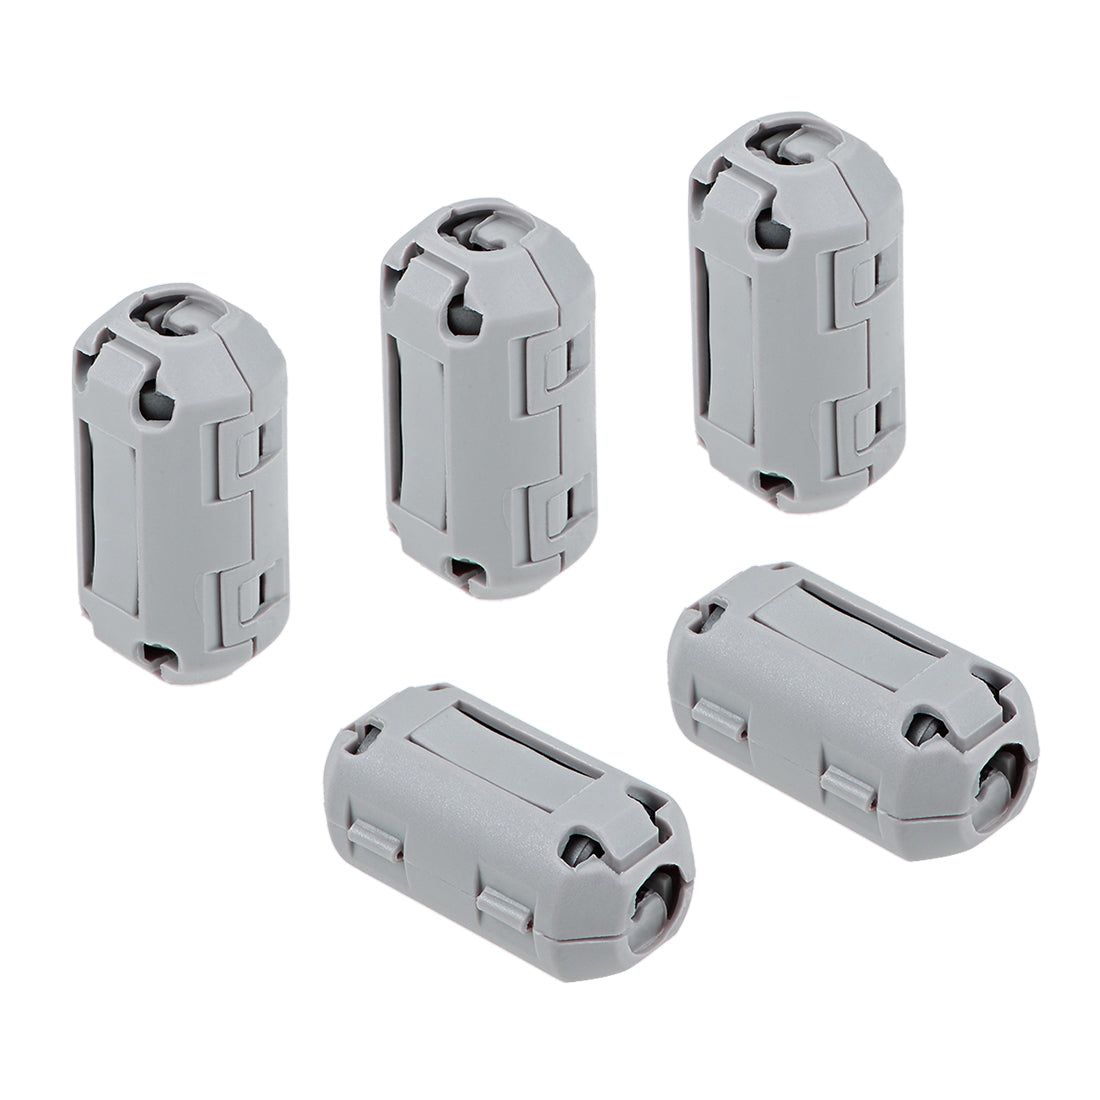 uxcell Uxcell 7mm Ferrite Cores Ring Clip-On RFI EMI Noise Suppression Cable Clip, Grey 5pcs